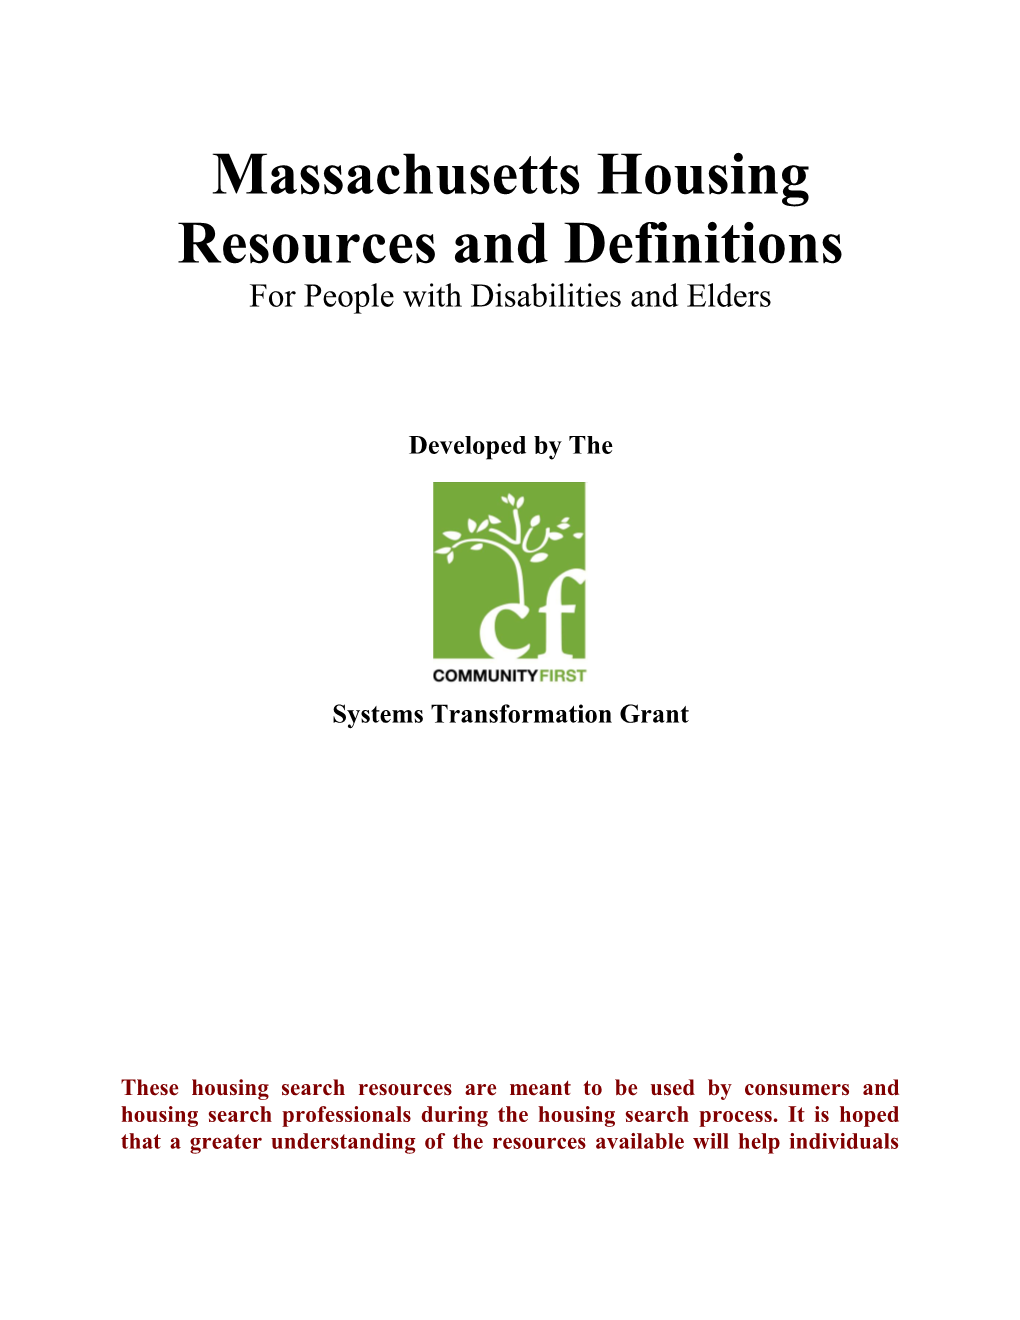 House Ma Housing Resources And Definitions